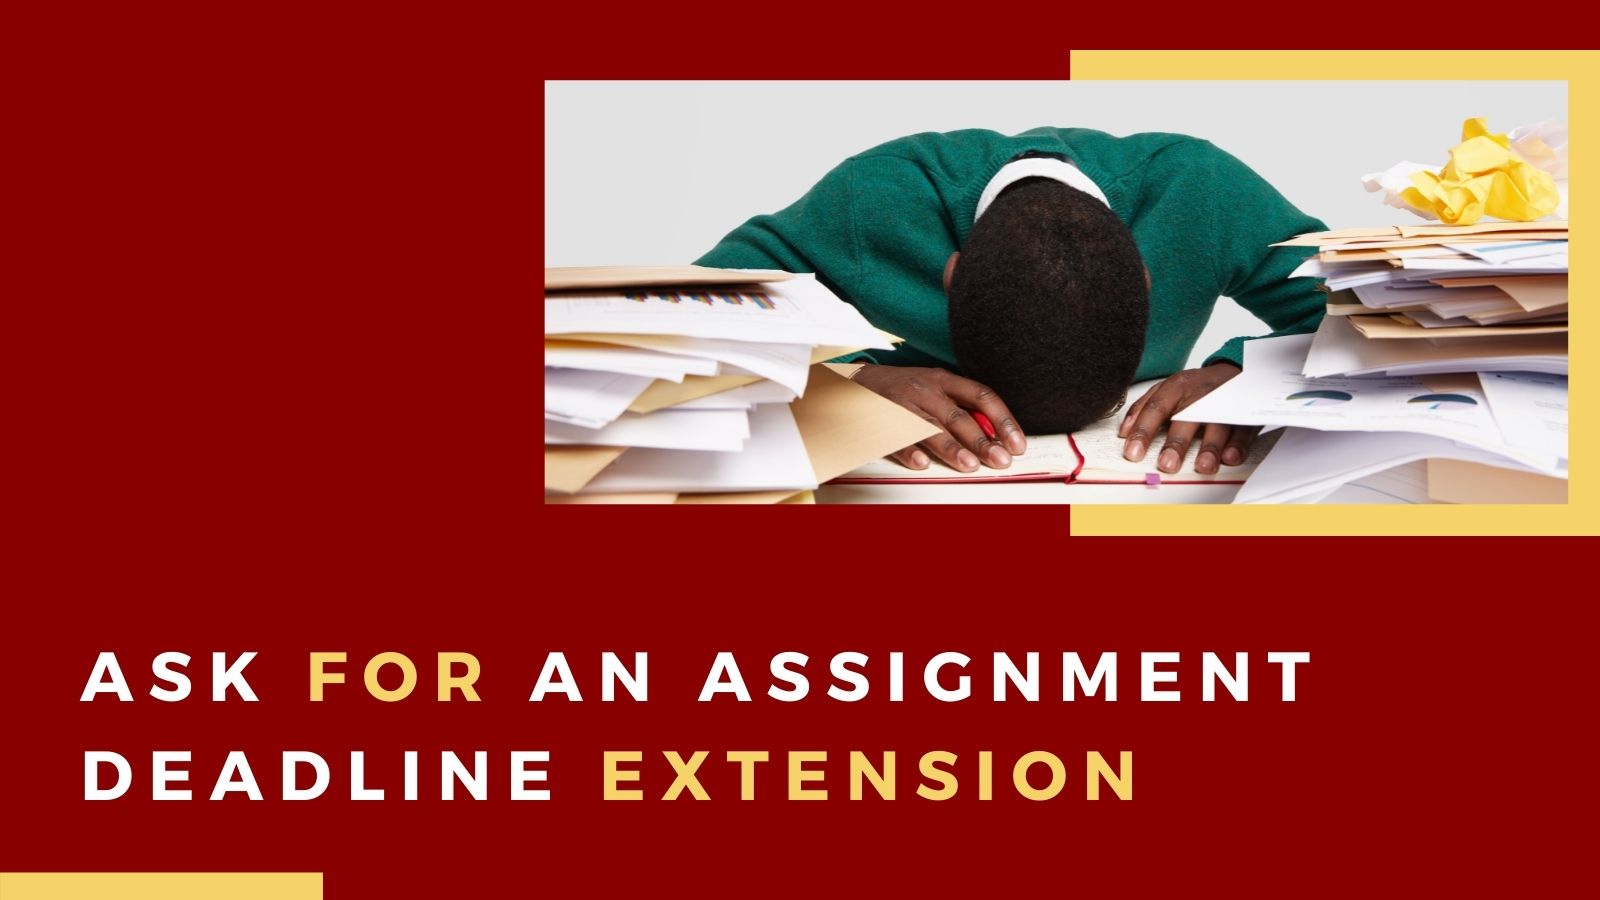 How To Ask For An Assignment Deadline Extension?